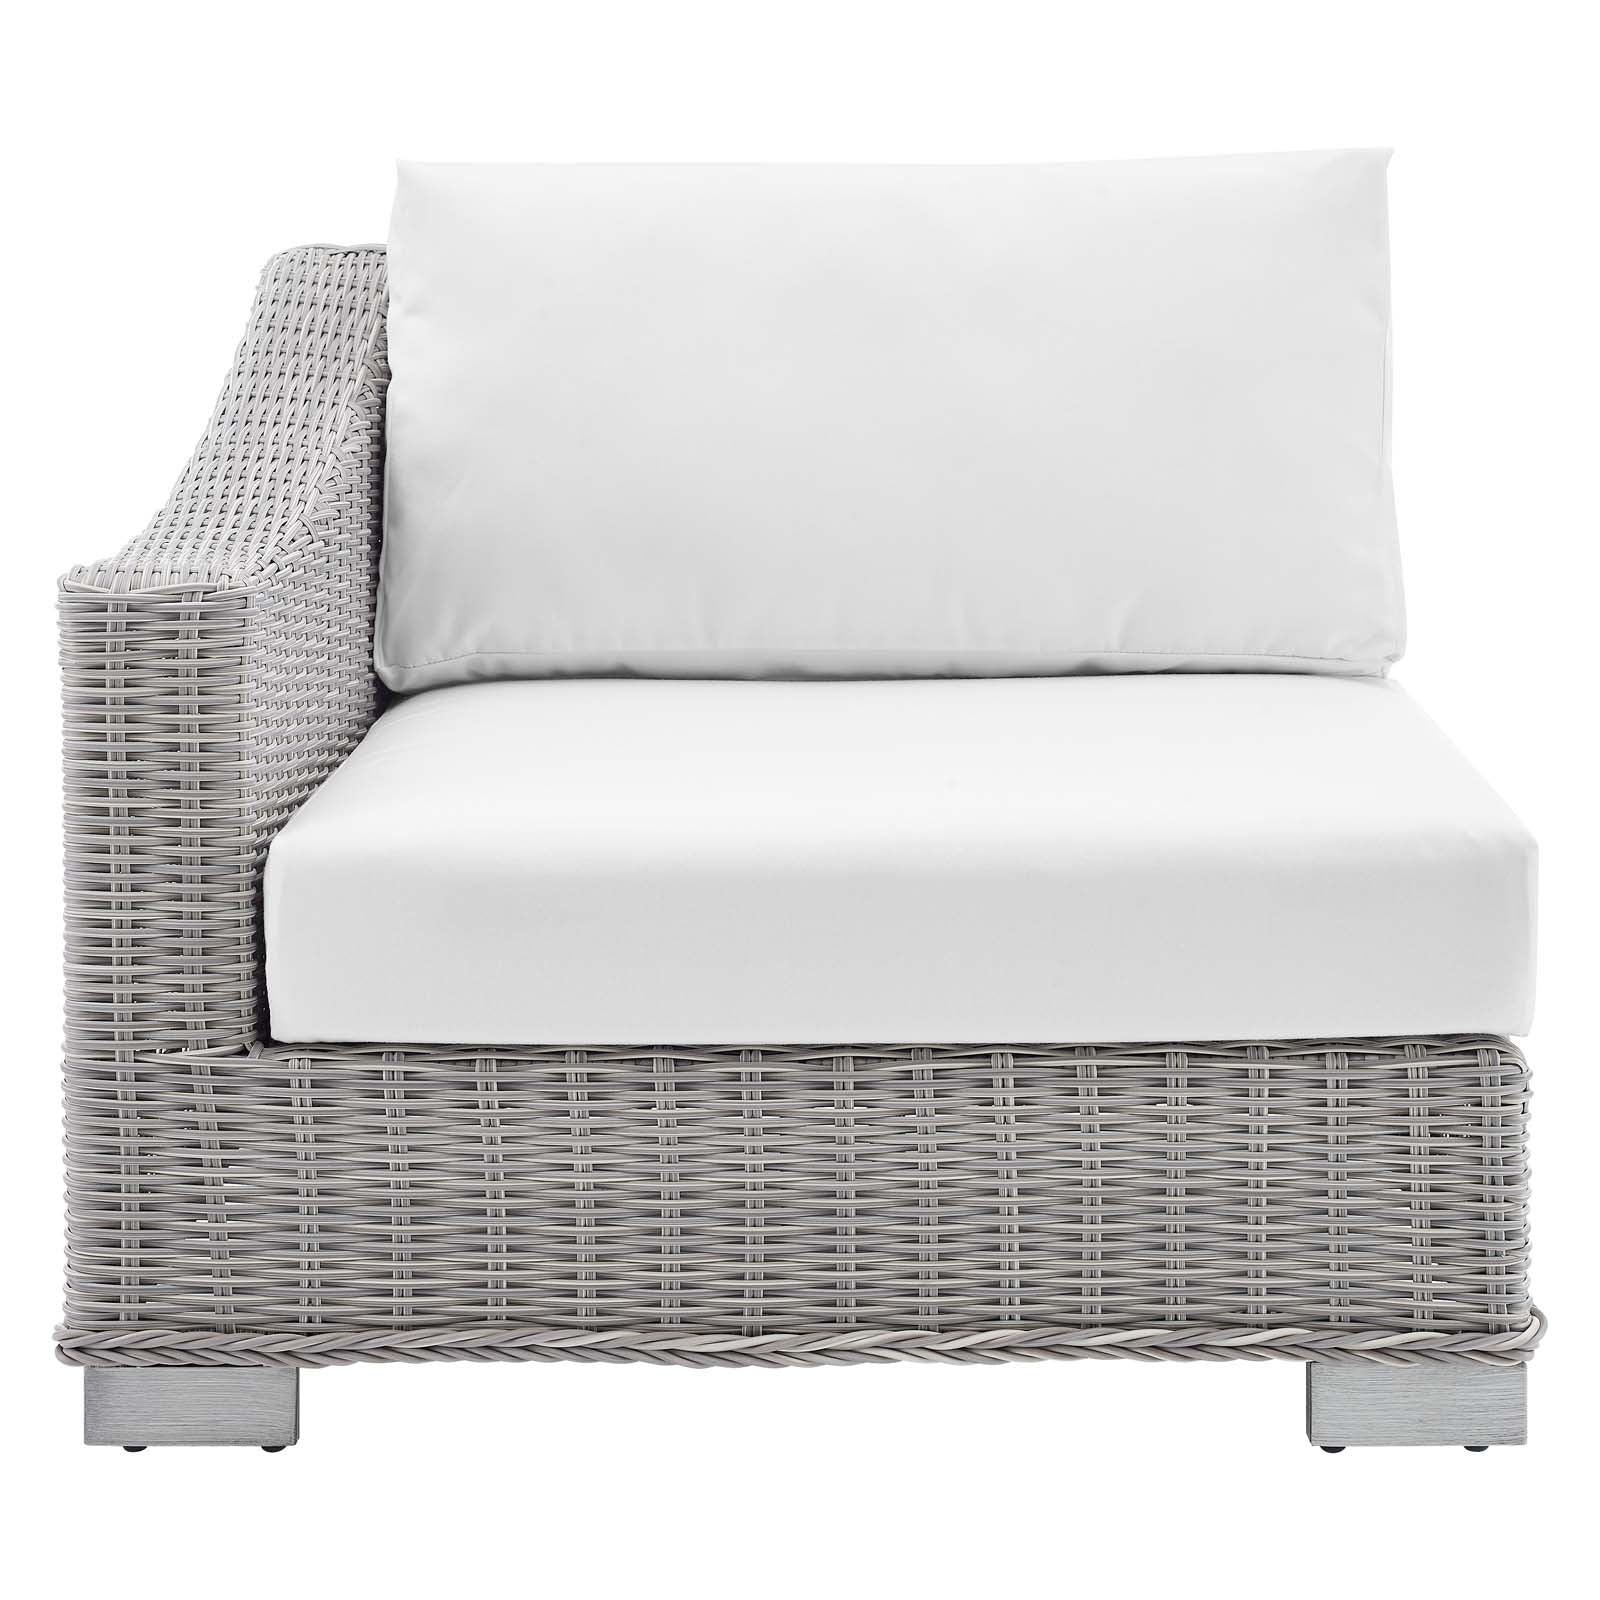 Conway Sunbrella® Outdoor Patio Wicker Rattan Left-Arm Chair-Outdoor Arm Chair-Modway-Wall2Wall Furnishings